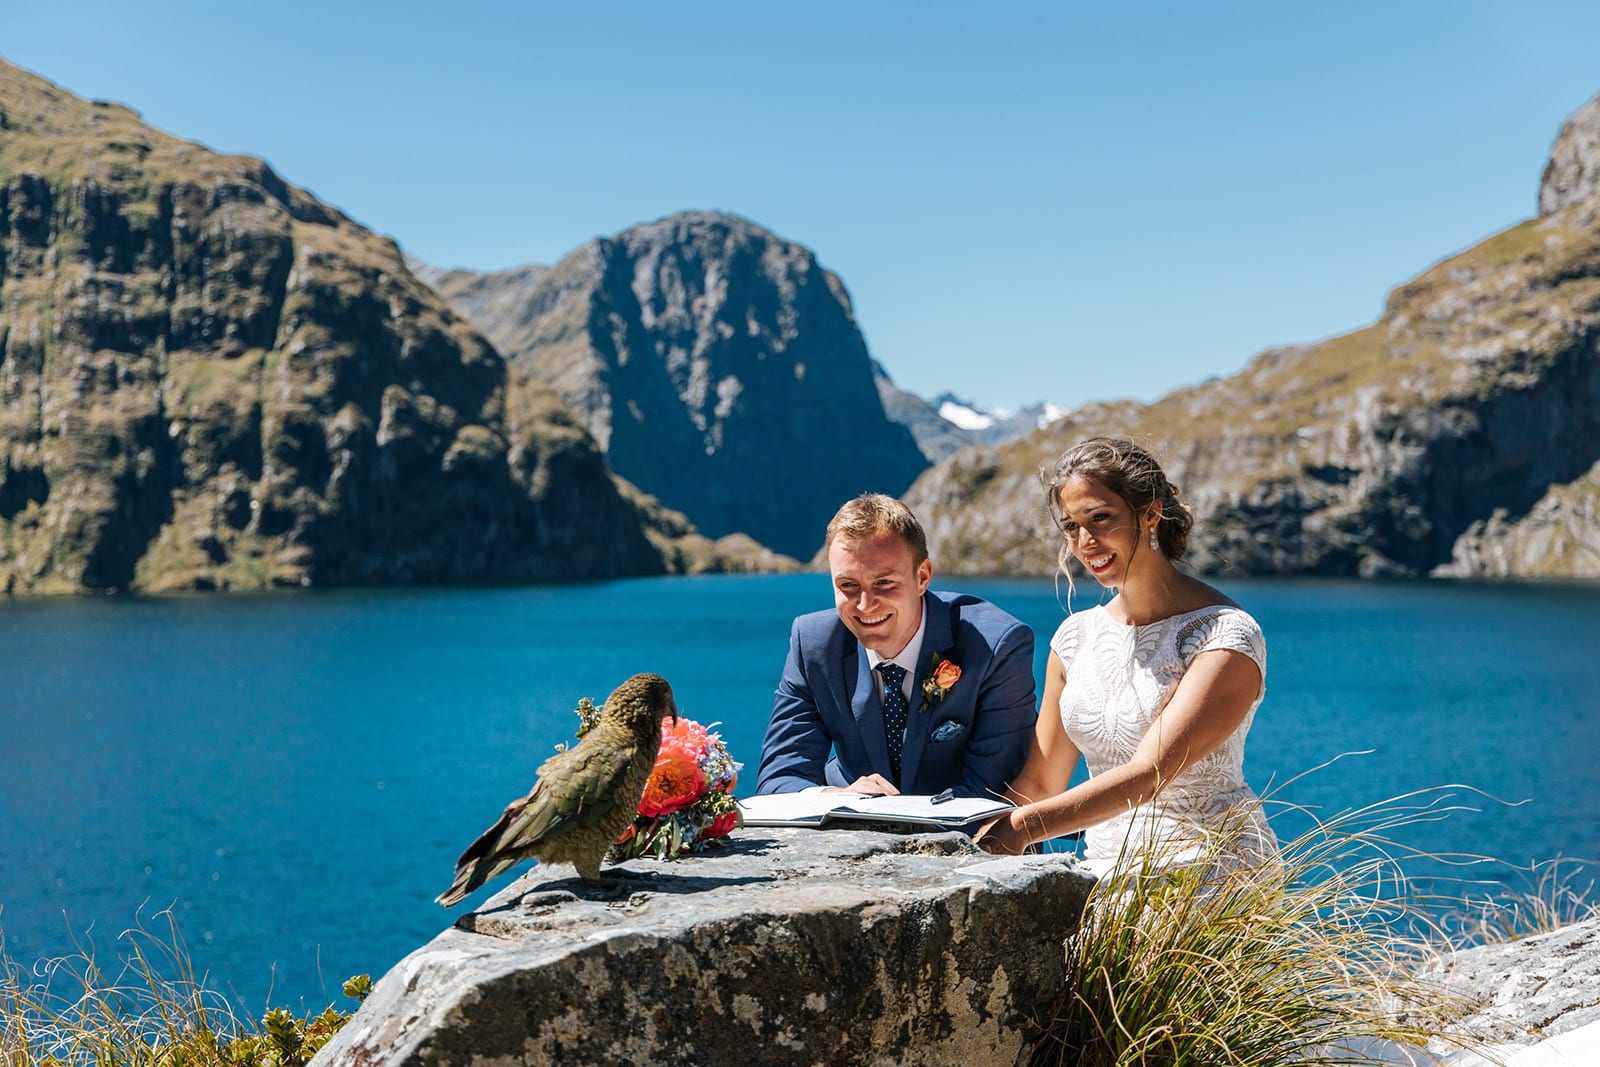 The best heli wedding package in Queenstown, The Majestic Heli Wedding at Lake Quill, Milford Sounds